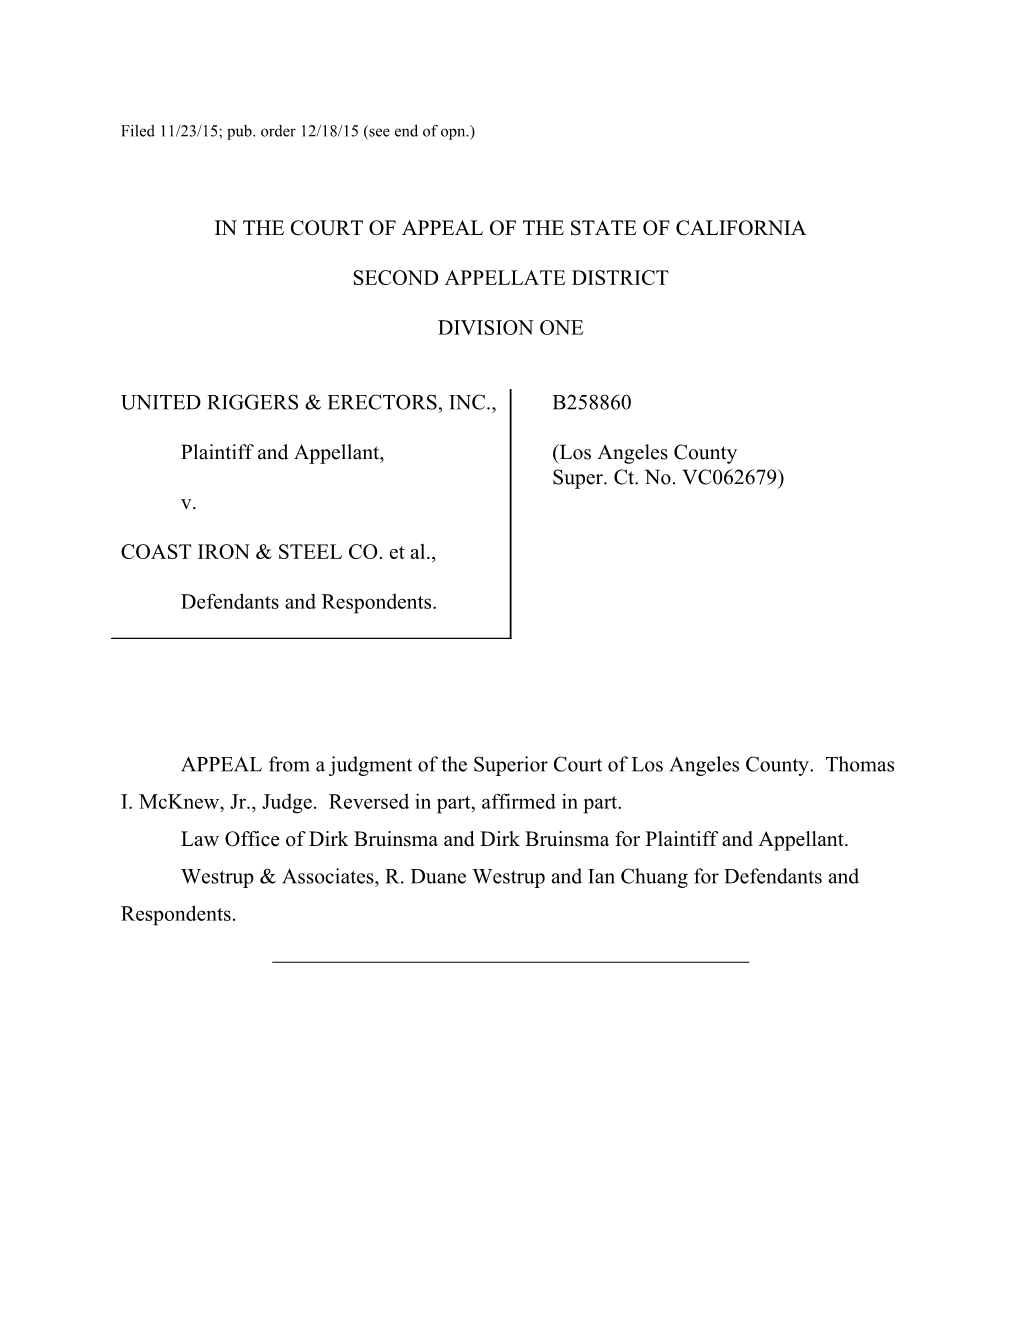 Filed 11/23/15; Pub. Order 12/18/15 (See End of Opn.)